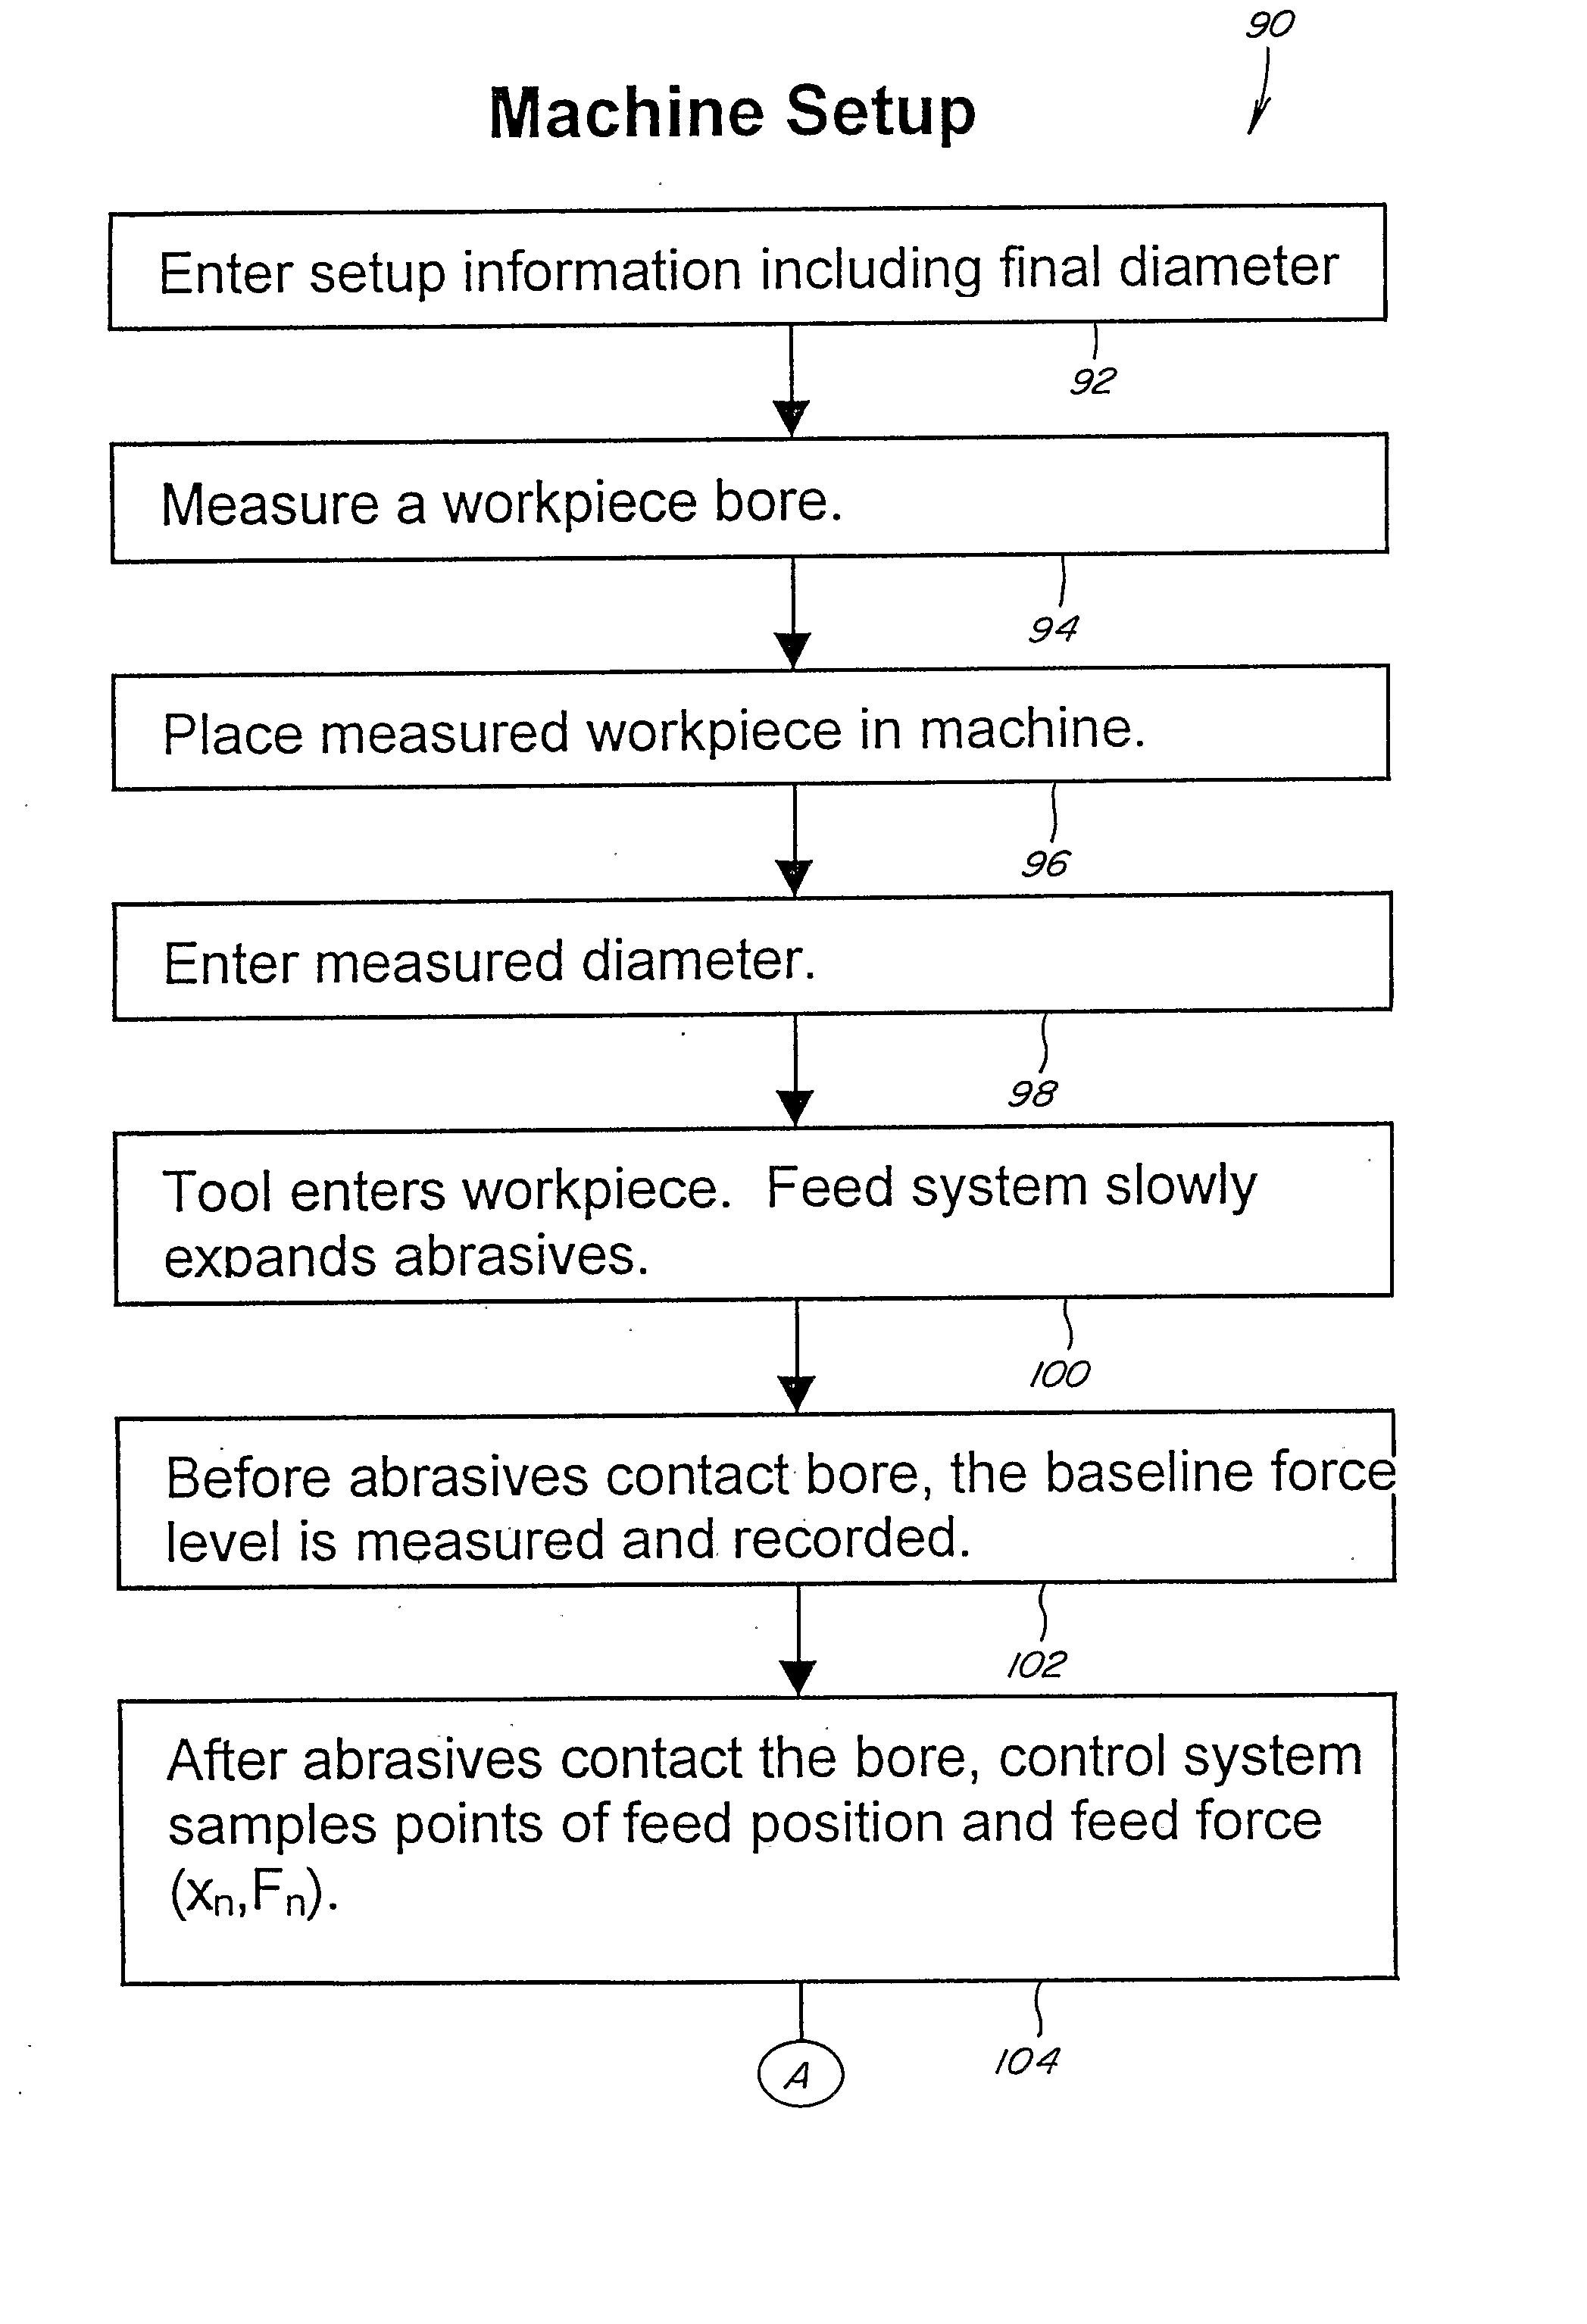 Honing Feed System Having Full Control of Feed Force, Rate, and Position and Method of Operation of the Same